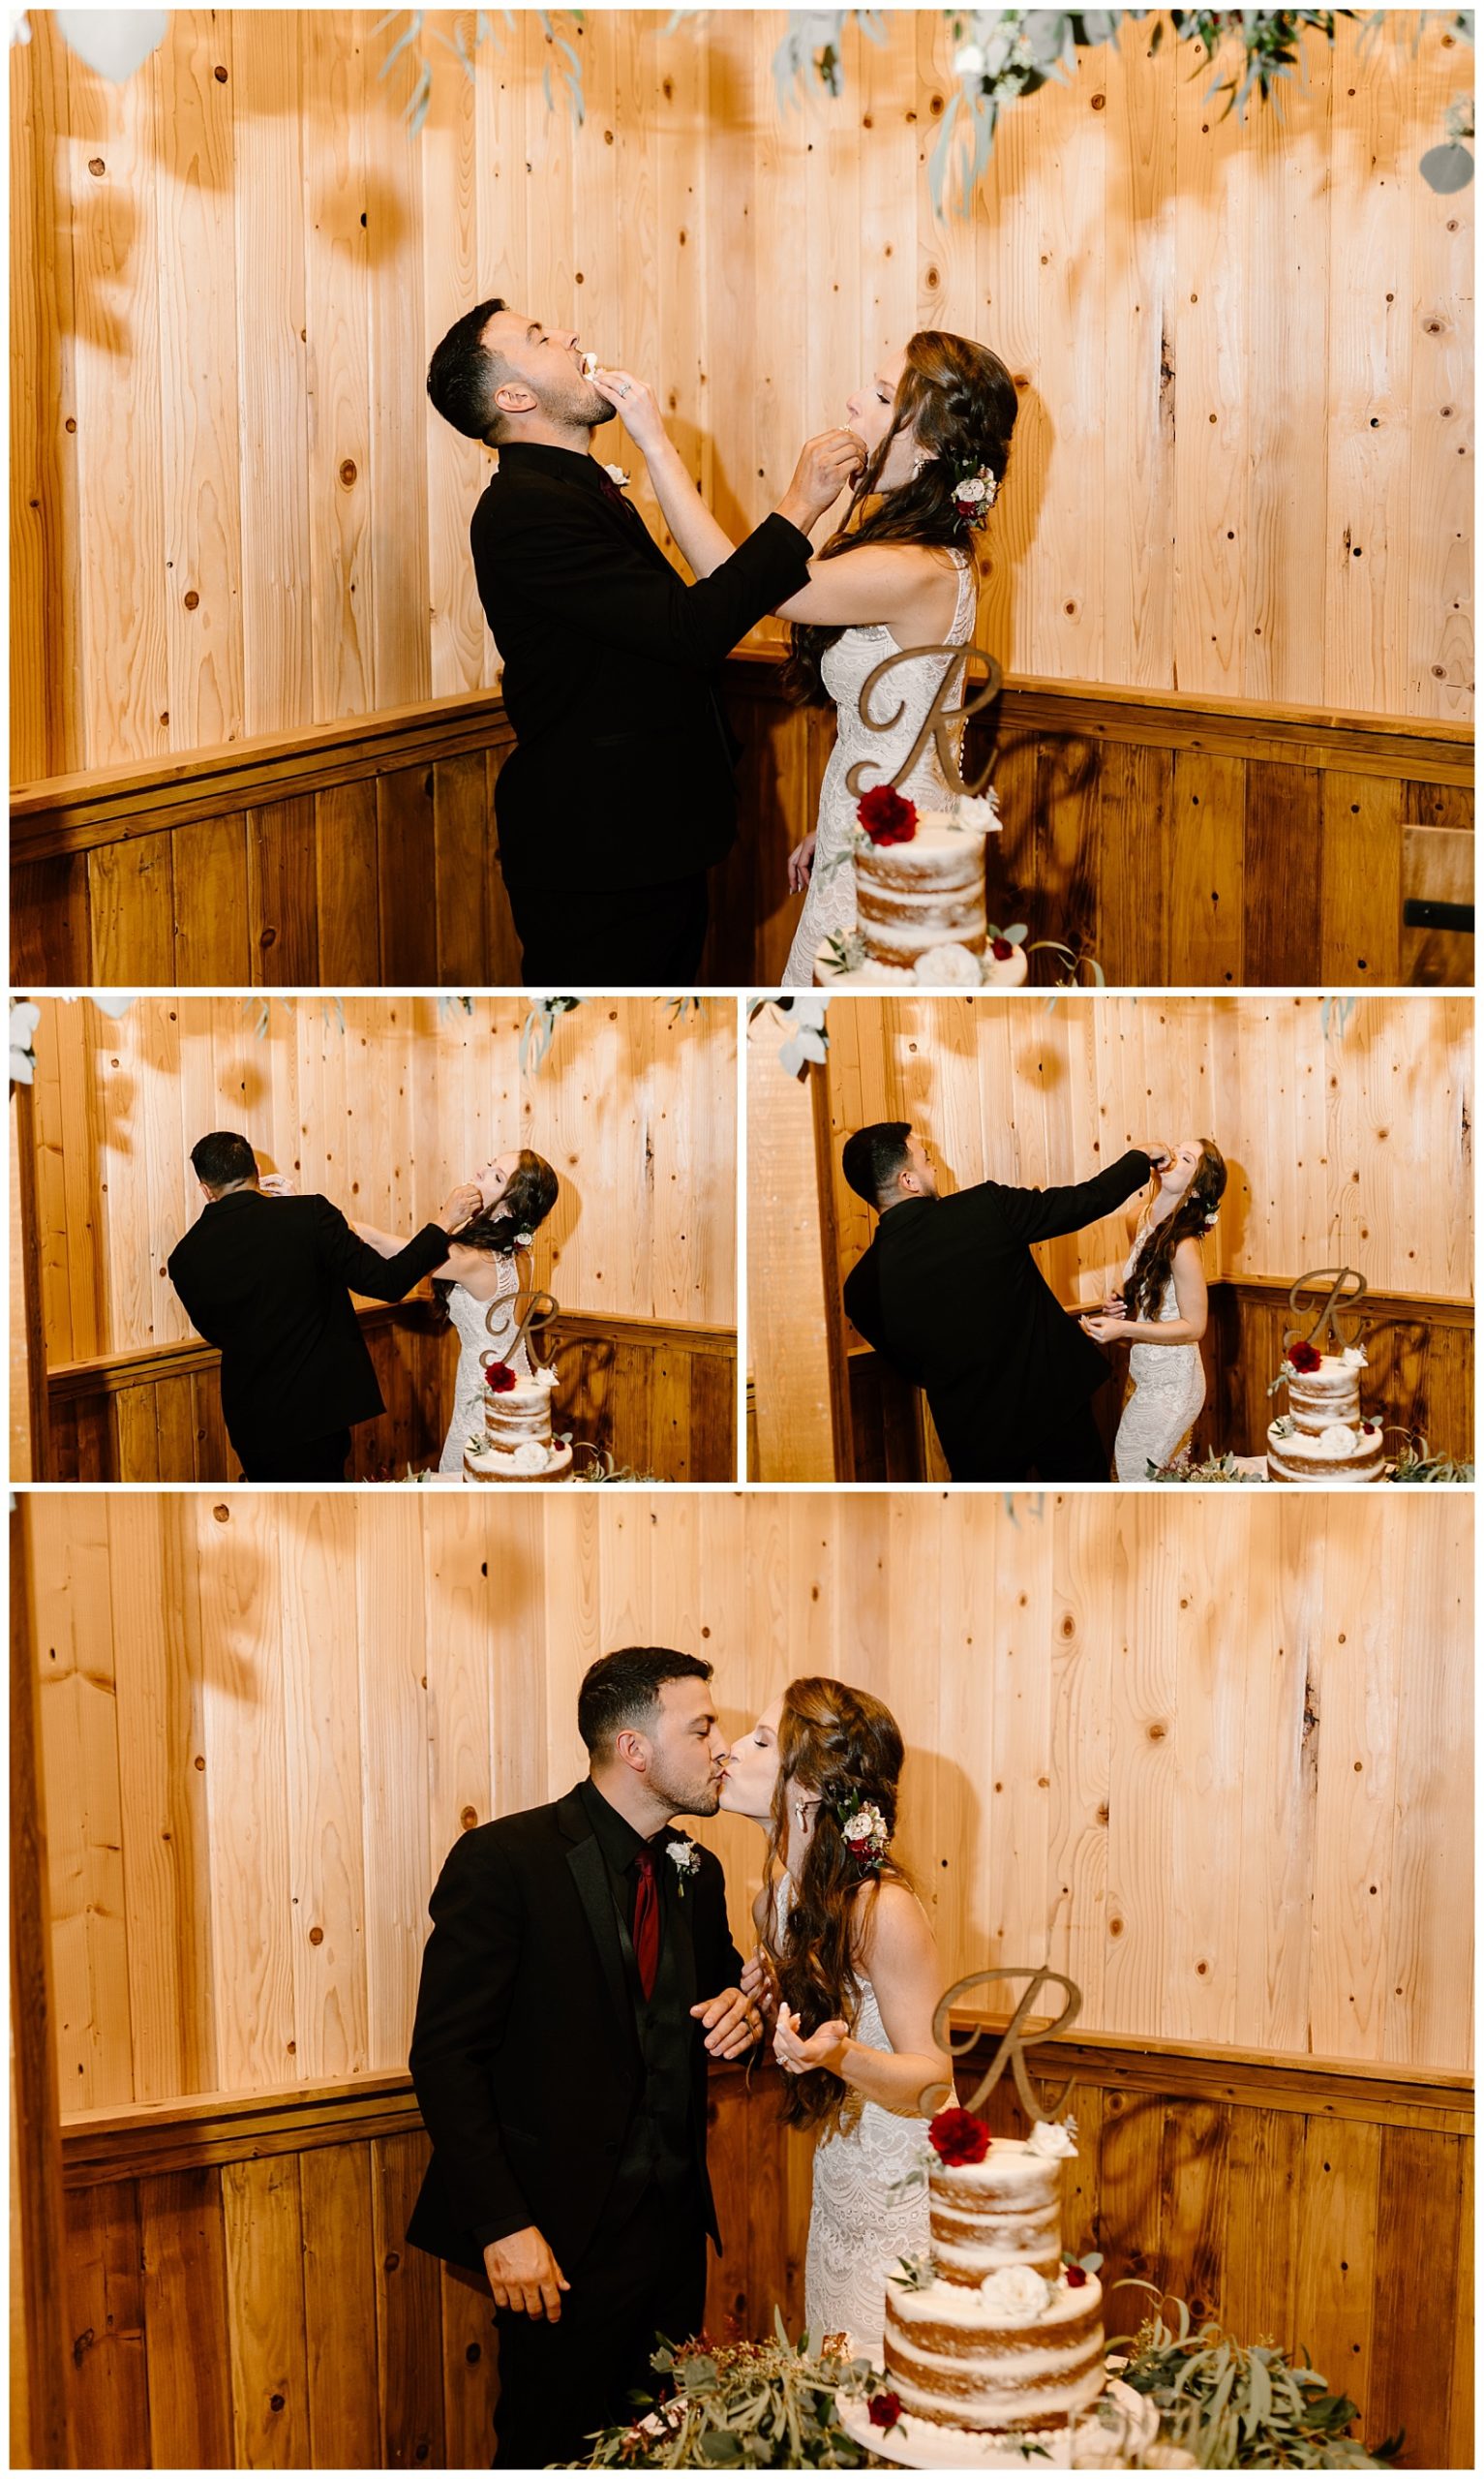 Bride smashes cake on groom's face during reception cake cutting